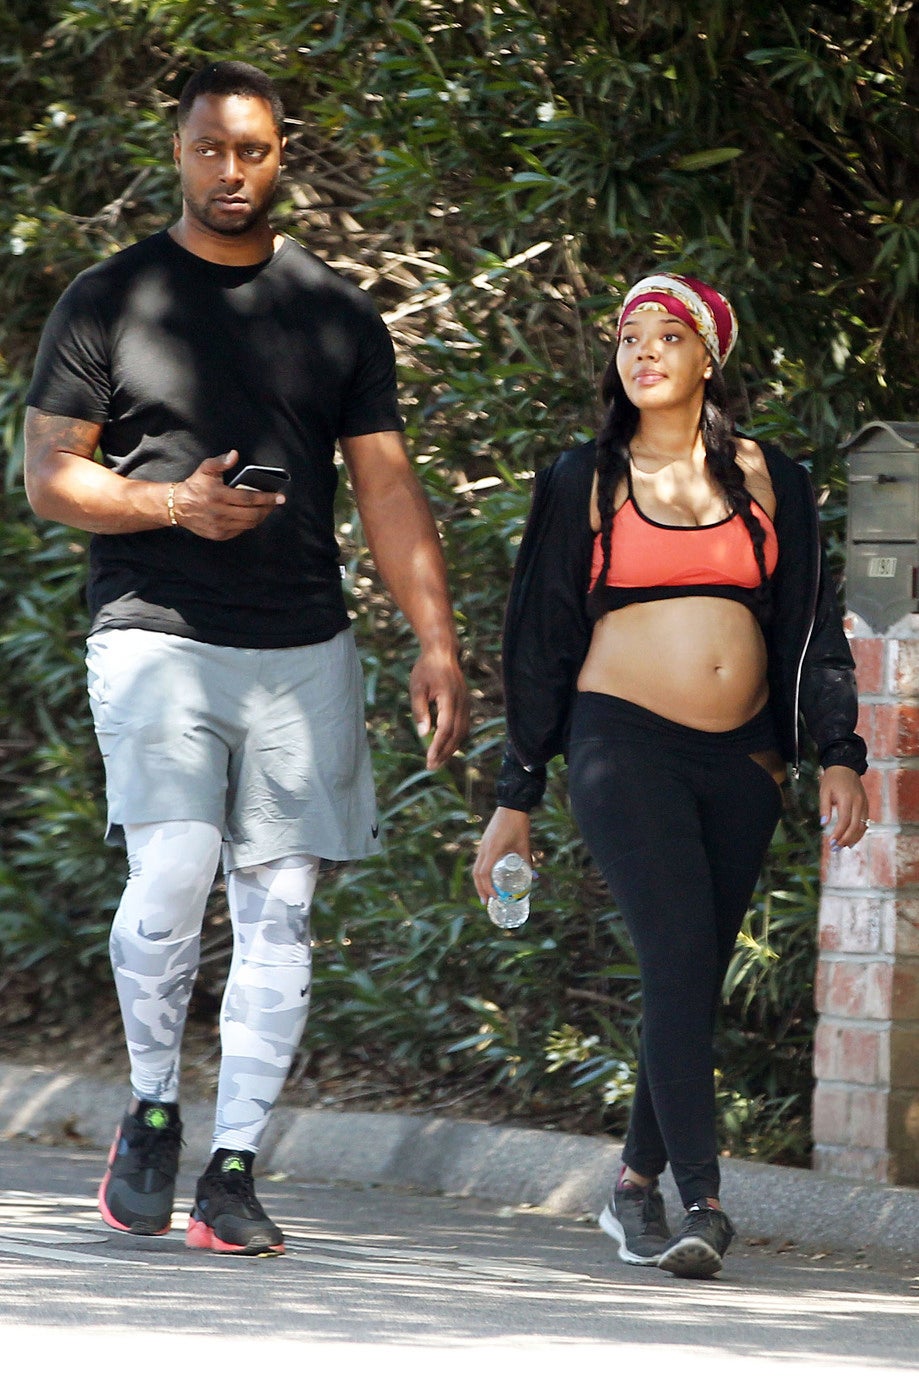 Photo Fab: Angela Simmons Steps Out for the First Time With Fiancé
